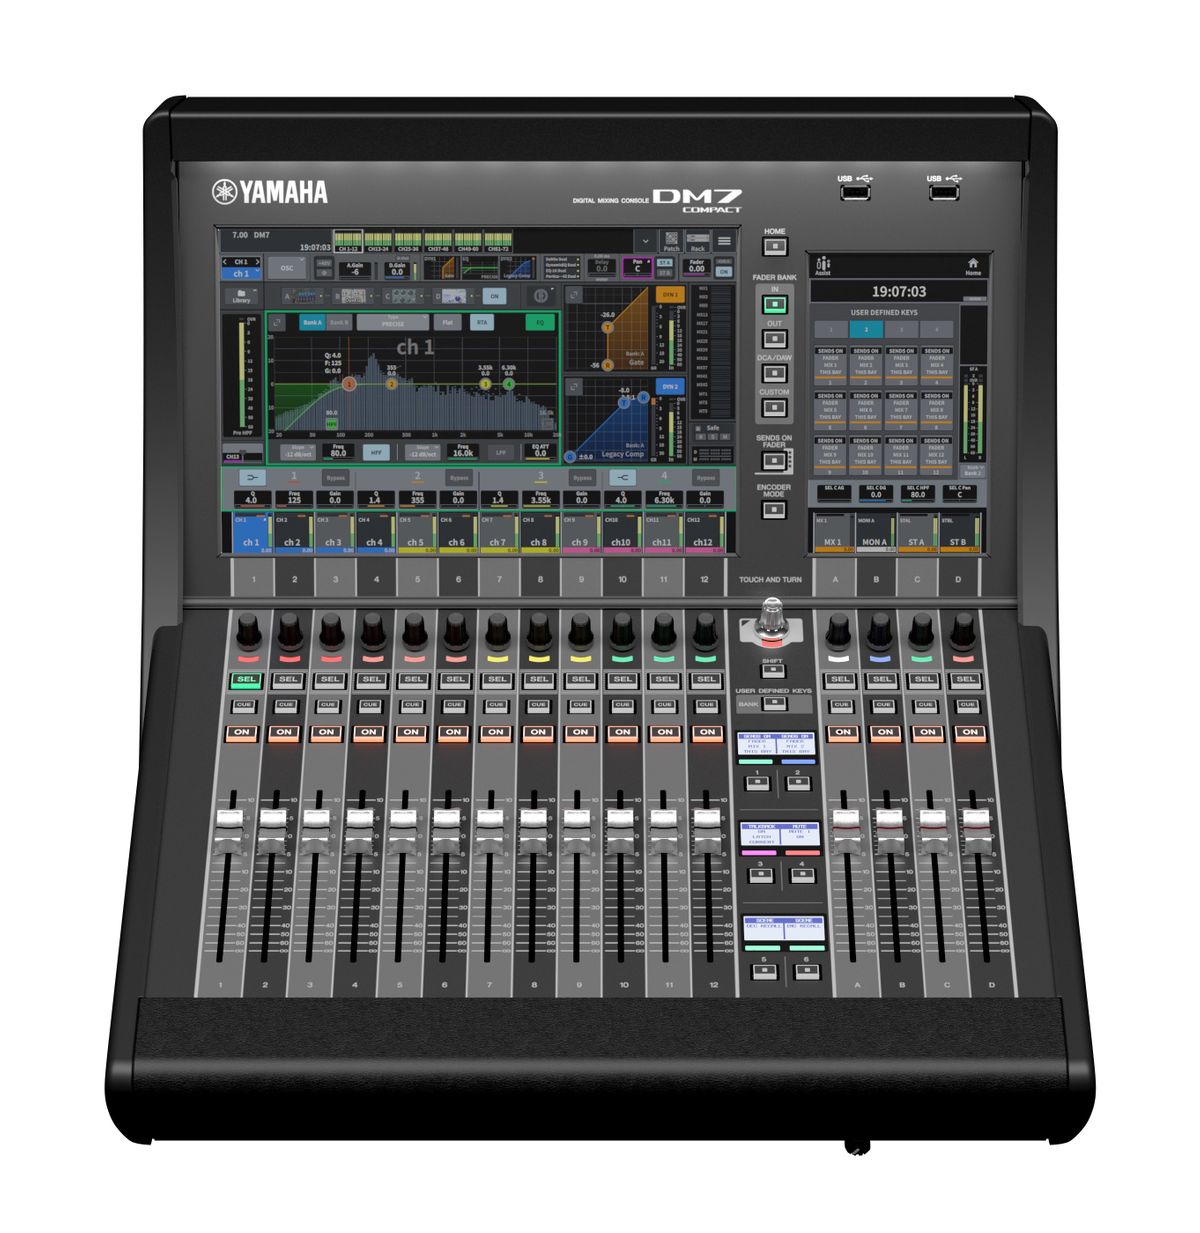 The Yamaha DM7C Compact Digital Mixing Console is available at Hollywood Sound Systems.